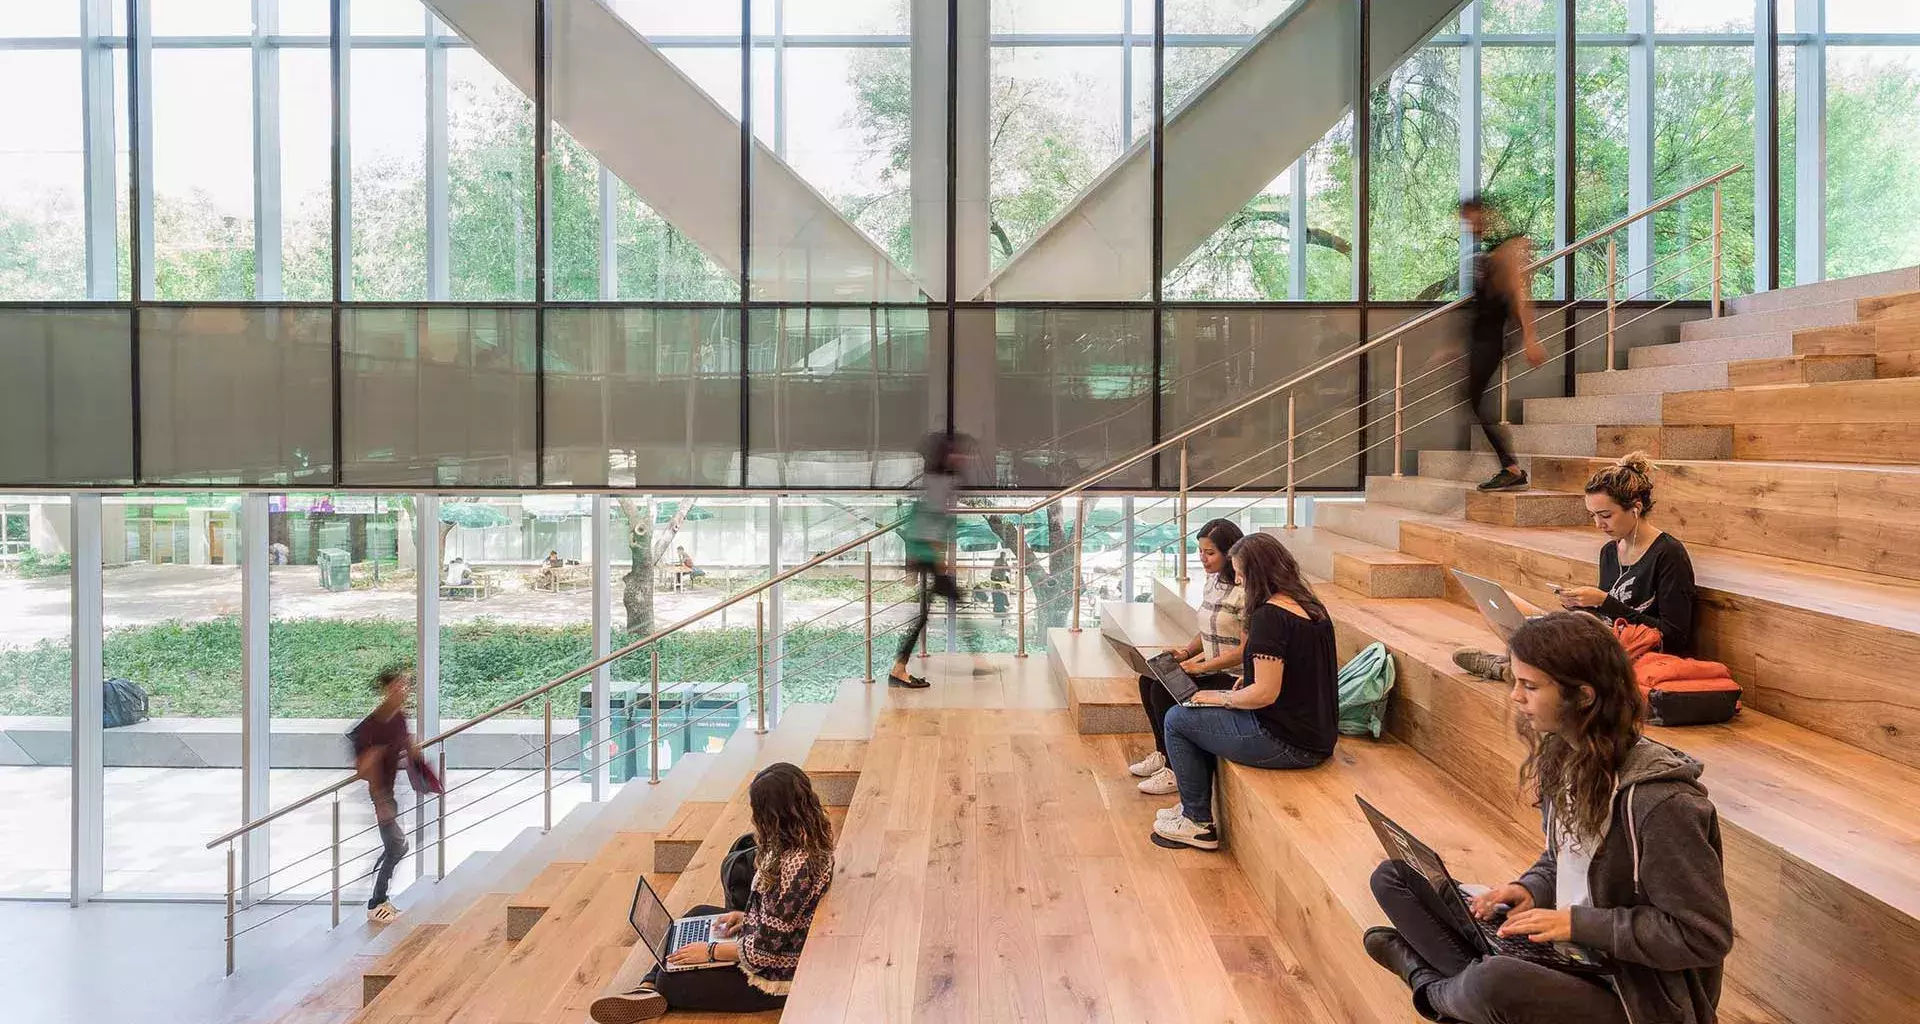 The new Tec library receives best-in-the-world design accolade